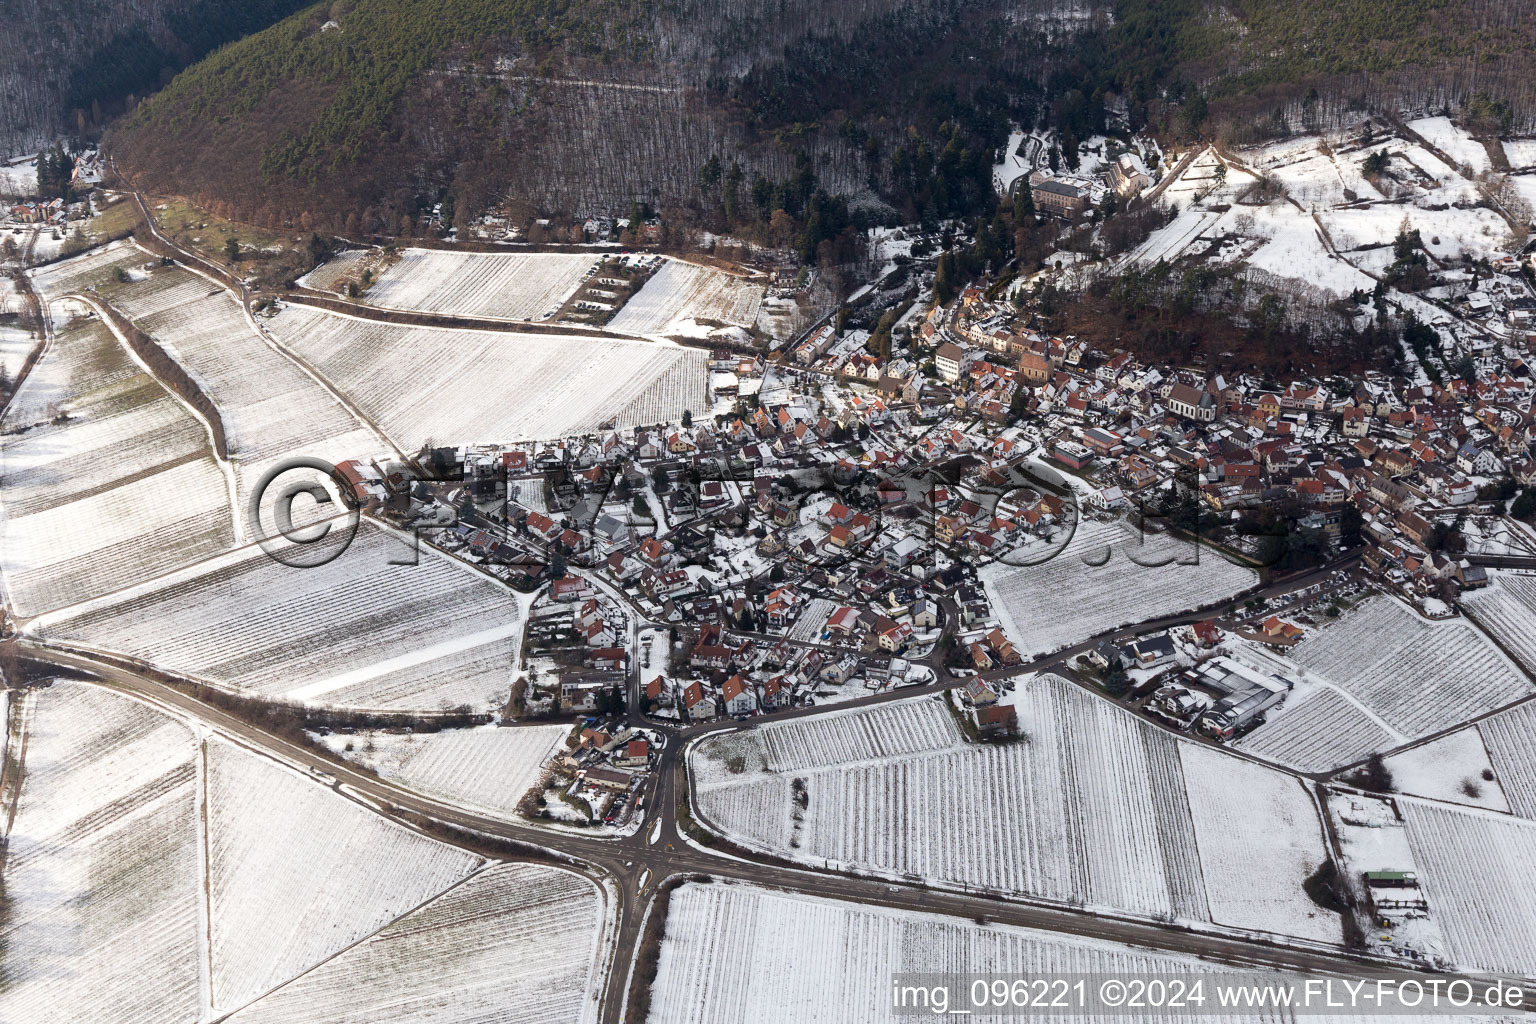 Drone image of Gleisweiler in the state Rhineland-Palatinate, Germany